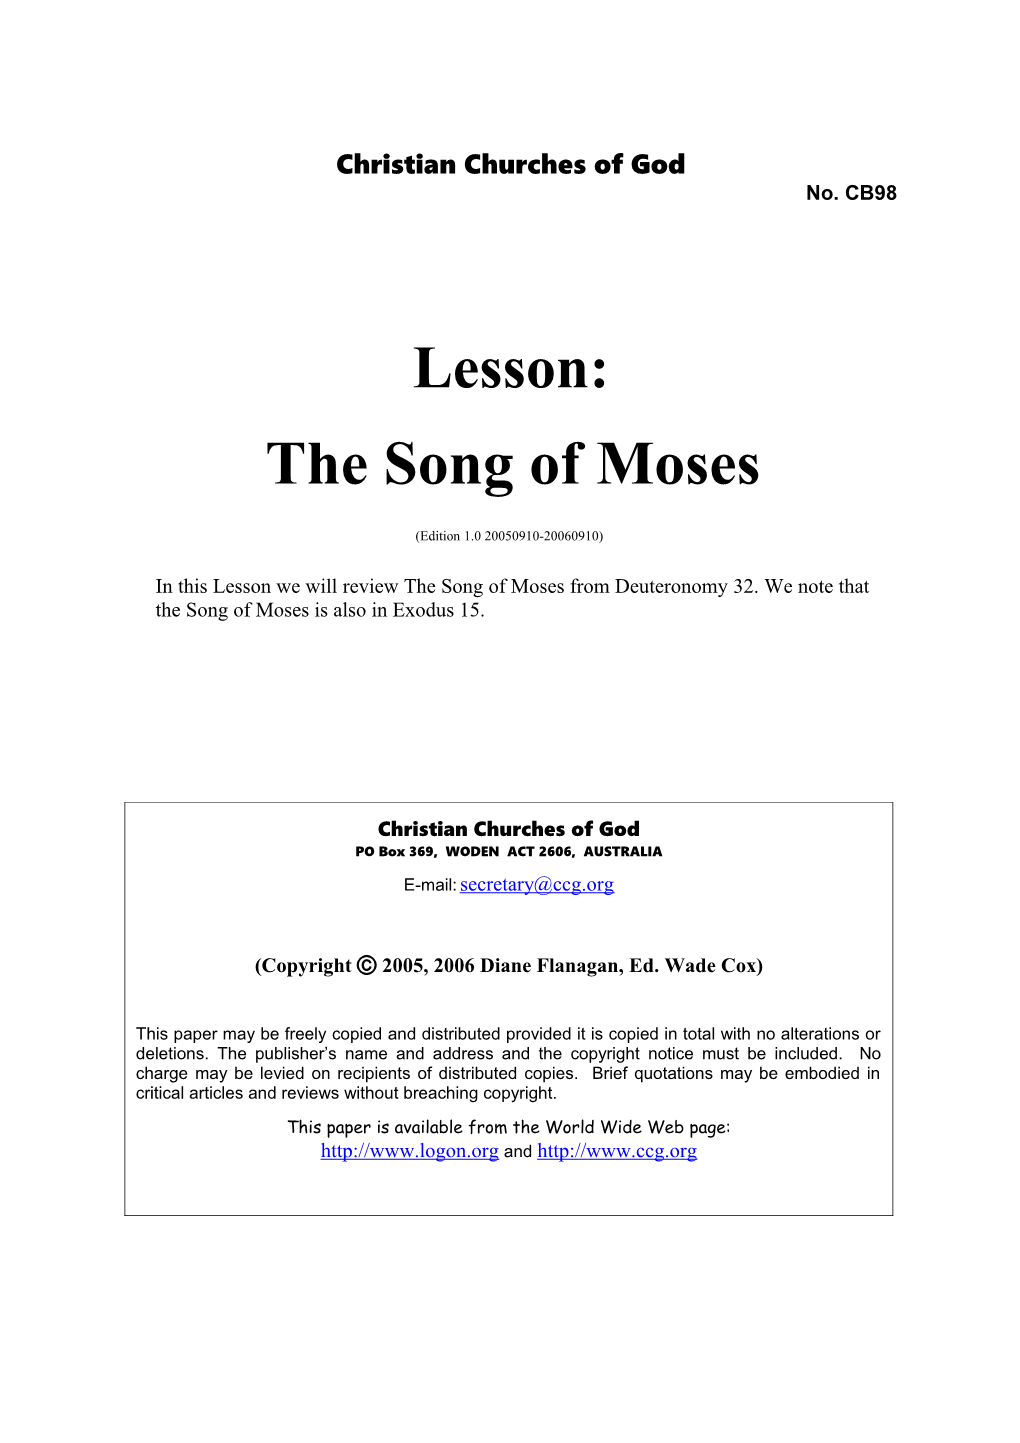 Lesson: the Song of Moses (No. CB98)